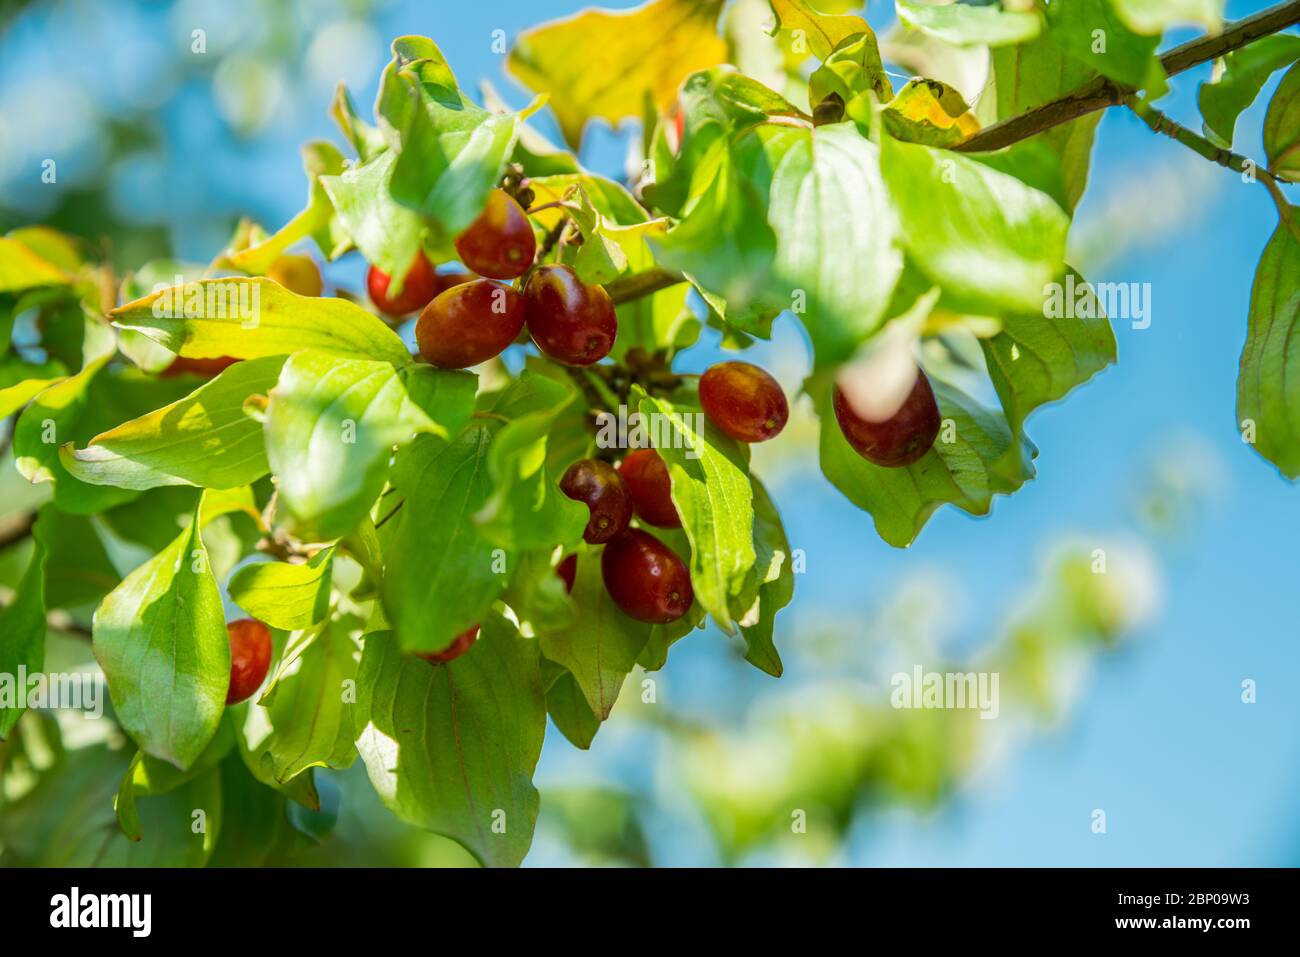 Red dogwood berries on the shrub close-up. Blue sky at the background. Stock Photo